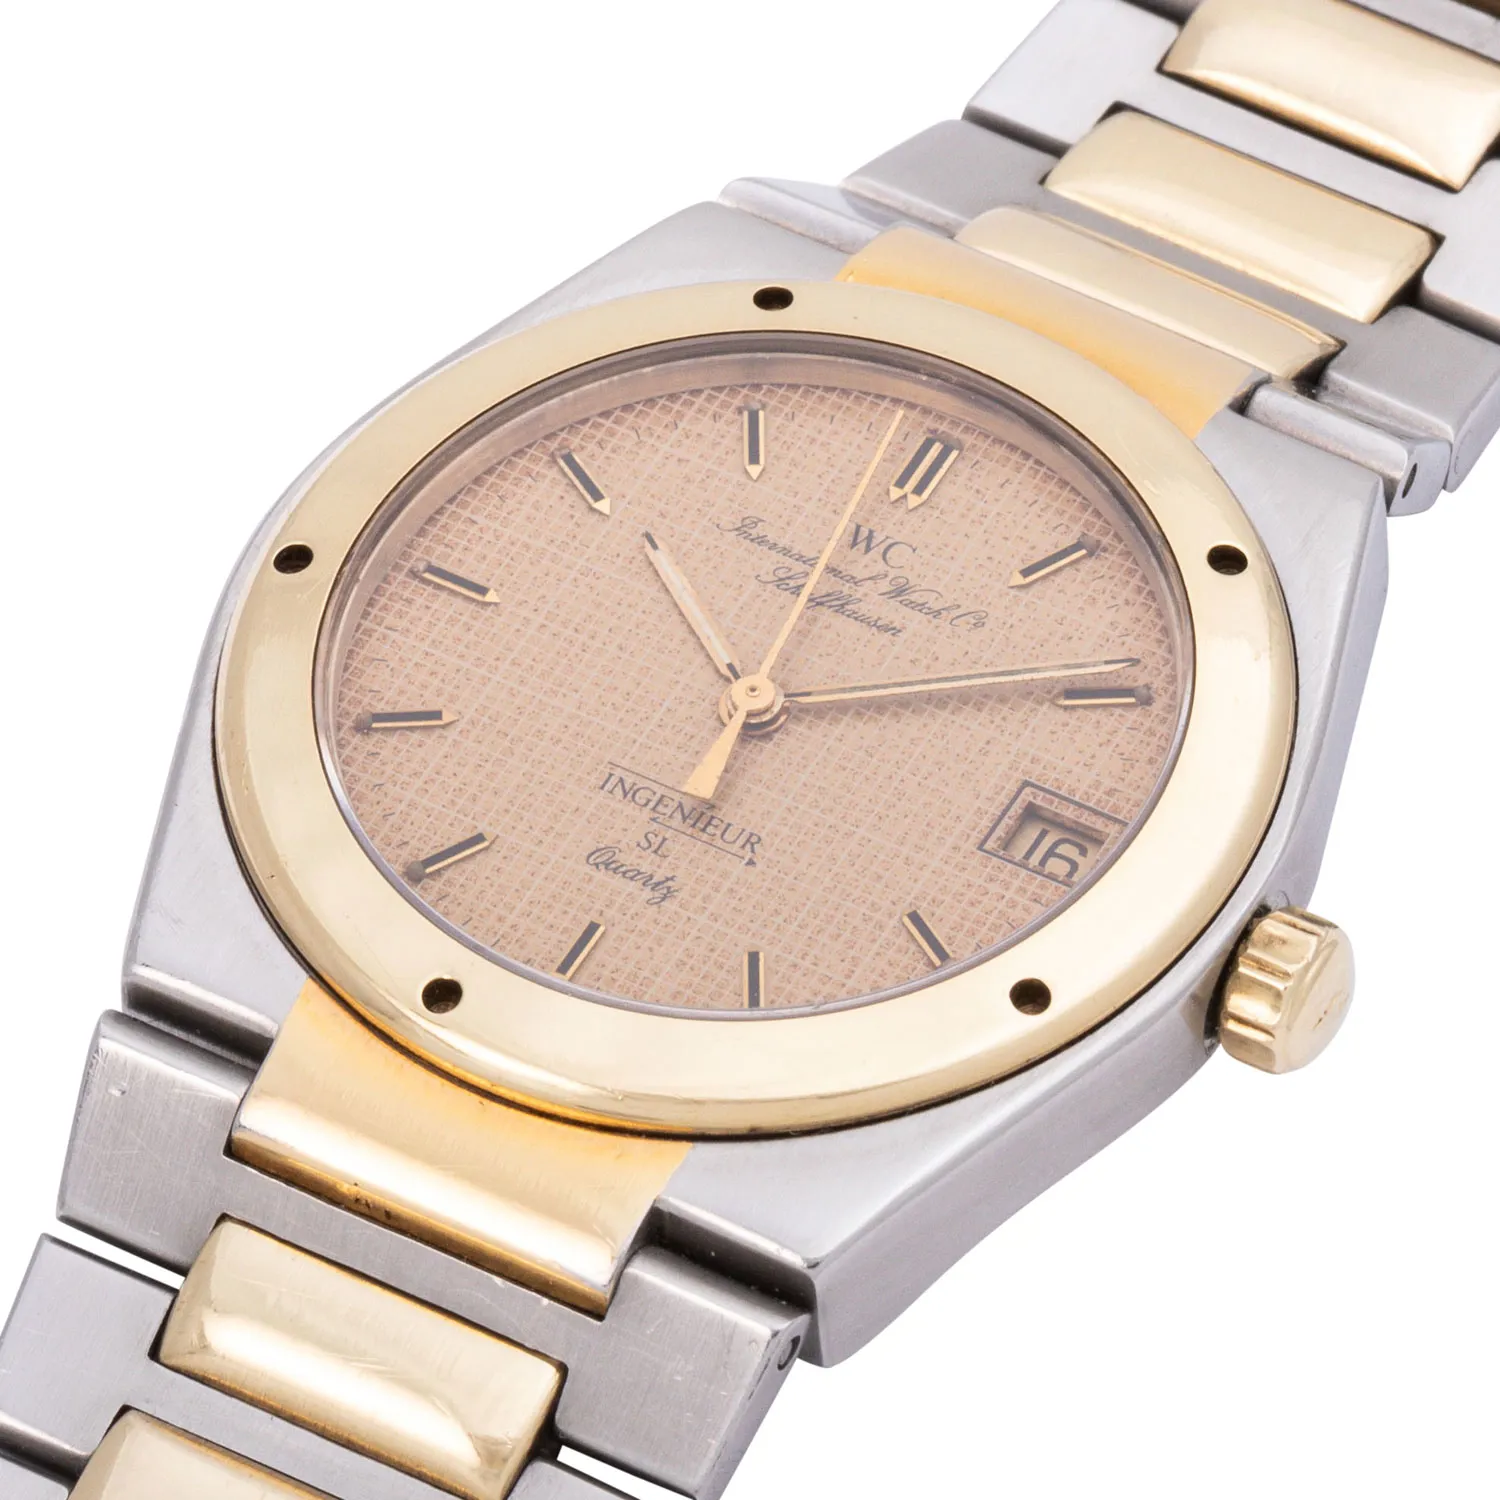 IWC Ingenieur 3305 34mm Yellow gold and stainless steel Gold 4